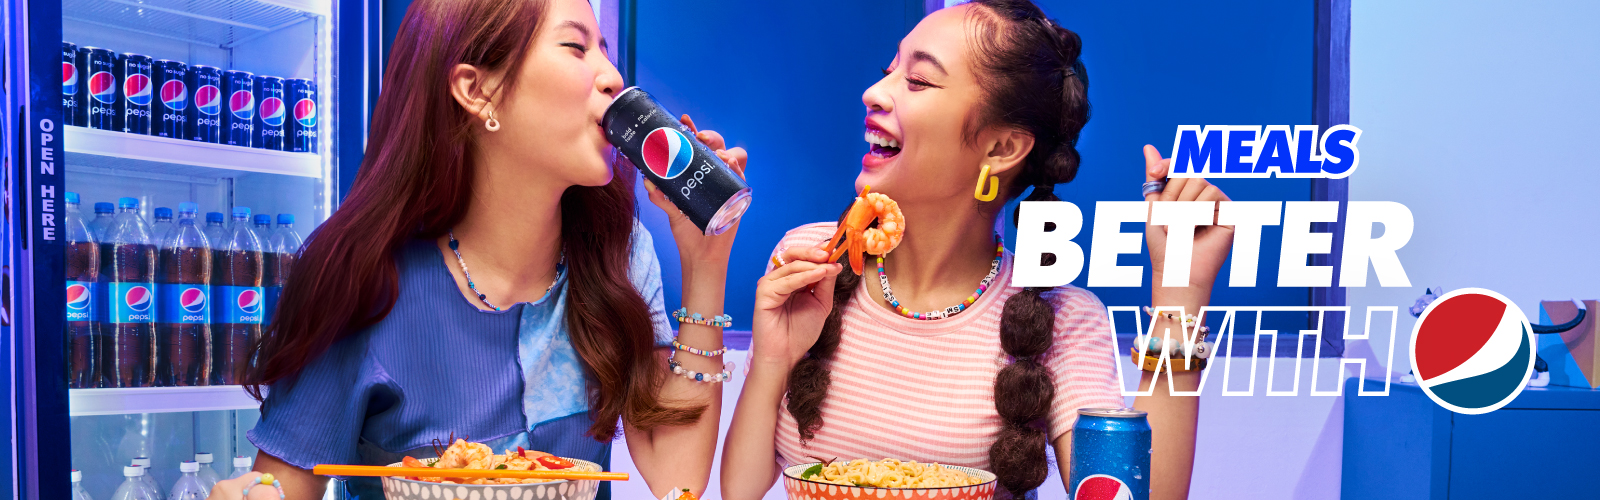 231010_Pepsi-Meal-_Online-Banner_1600x500_FA